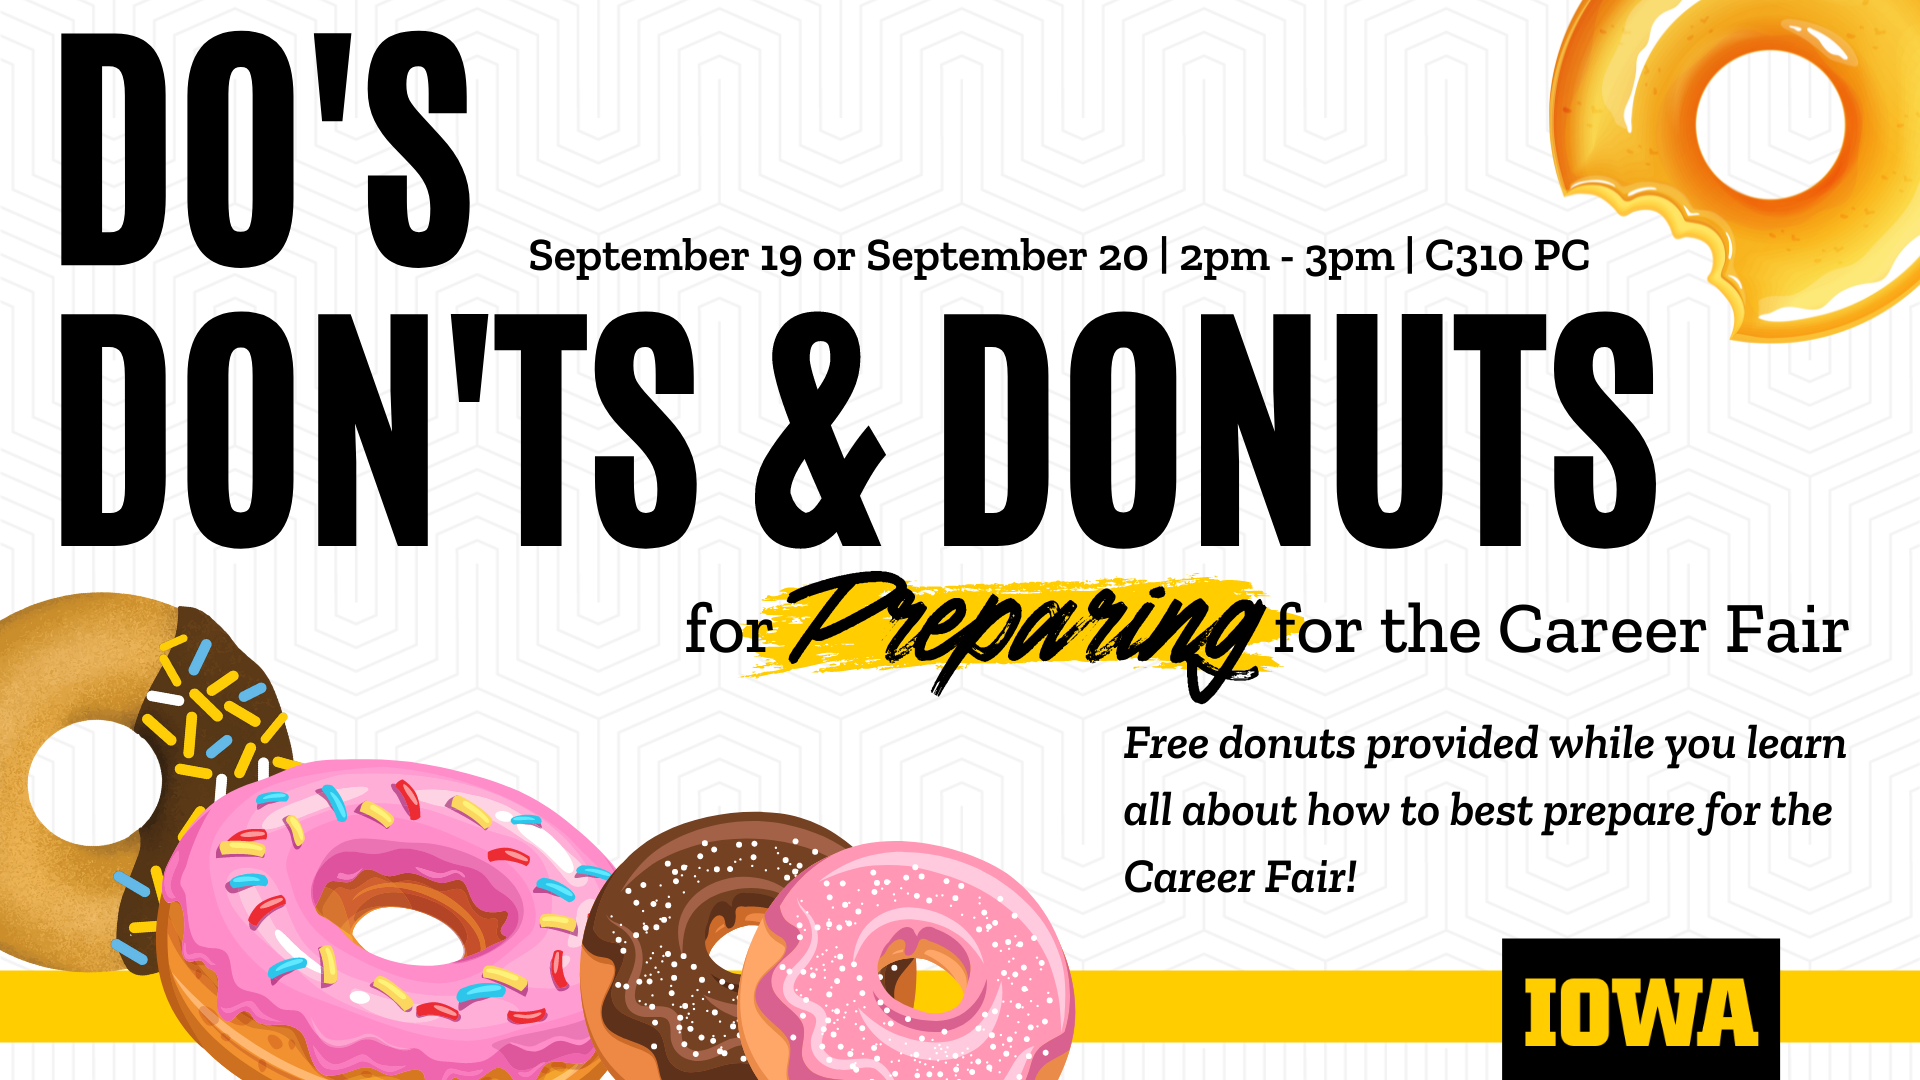 Dos Donts Donuts for preparing for the career fair mon, sept. 19 and tues. sept. 20 2:00-3:00pm in C310 Pomerantz Center